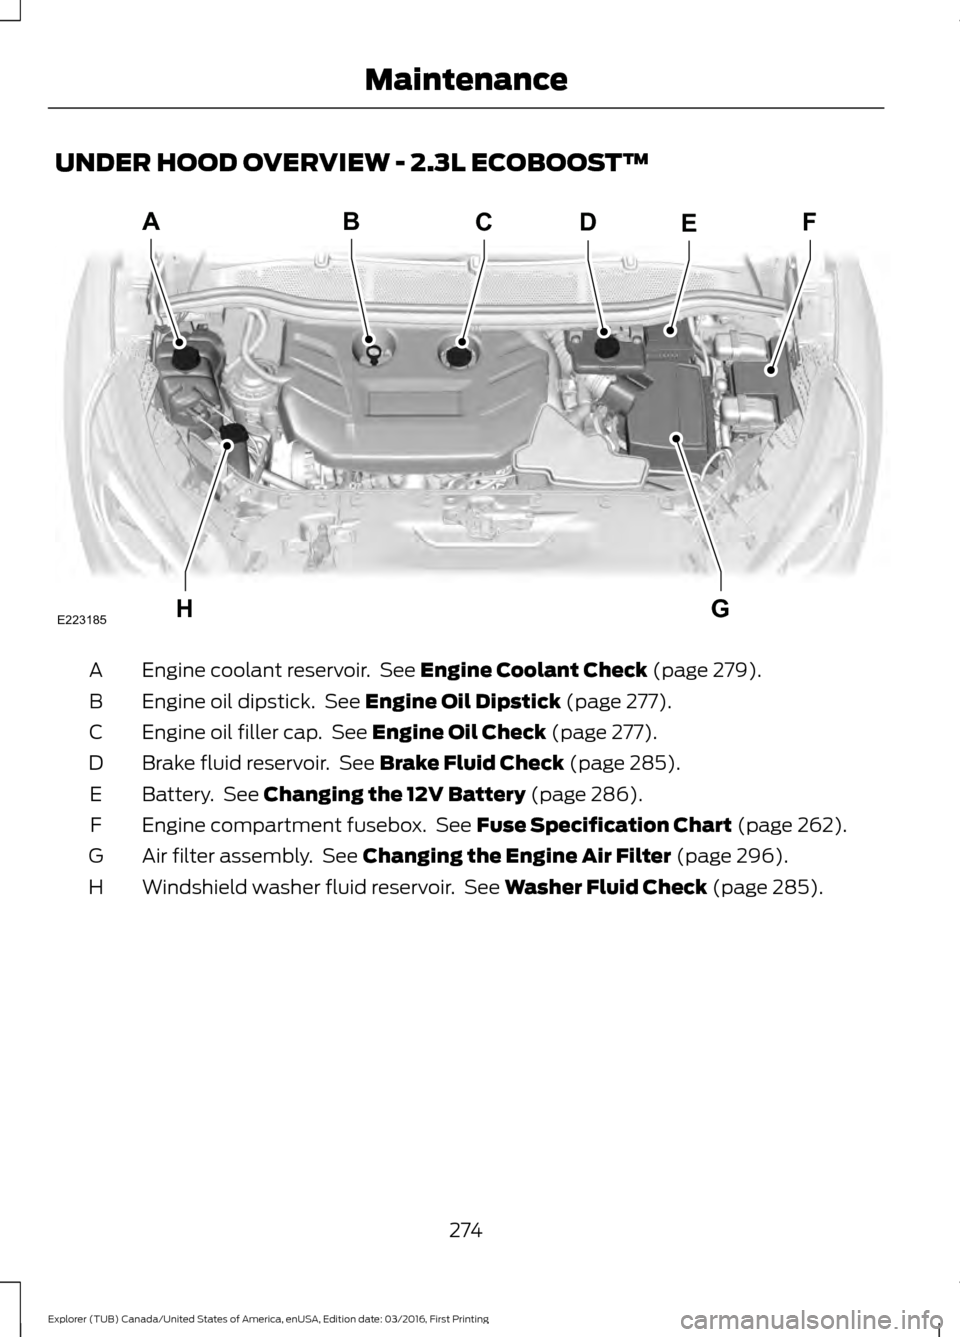 FORD EXPLORER 2017 5.G Owners Manual UNDER HOOD OVERVIEW - 2.3L ECOBOOST™
Engine coolant reservoir.  See Engine Coolant Check (page 279).
A
Engine oil dipstick.  See 
Engine Oil Dipstick (page 277).
B
Engine oil filler cap.  See 
Engin